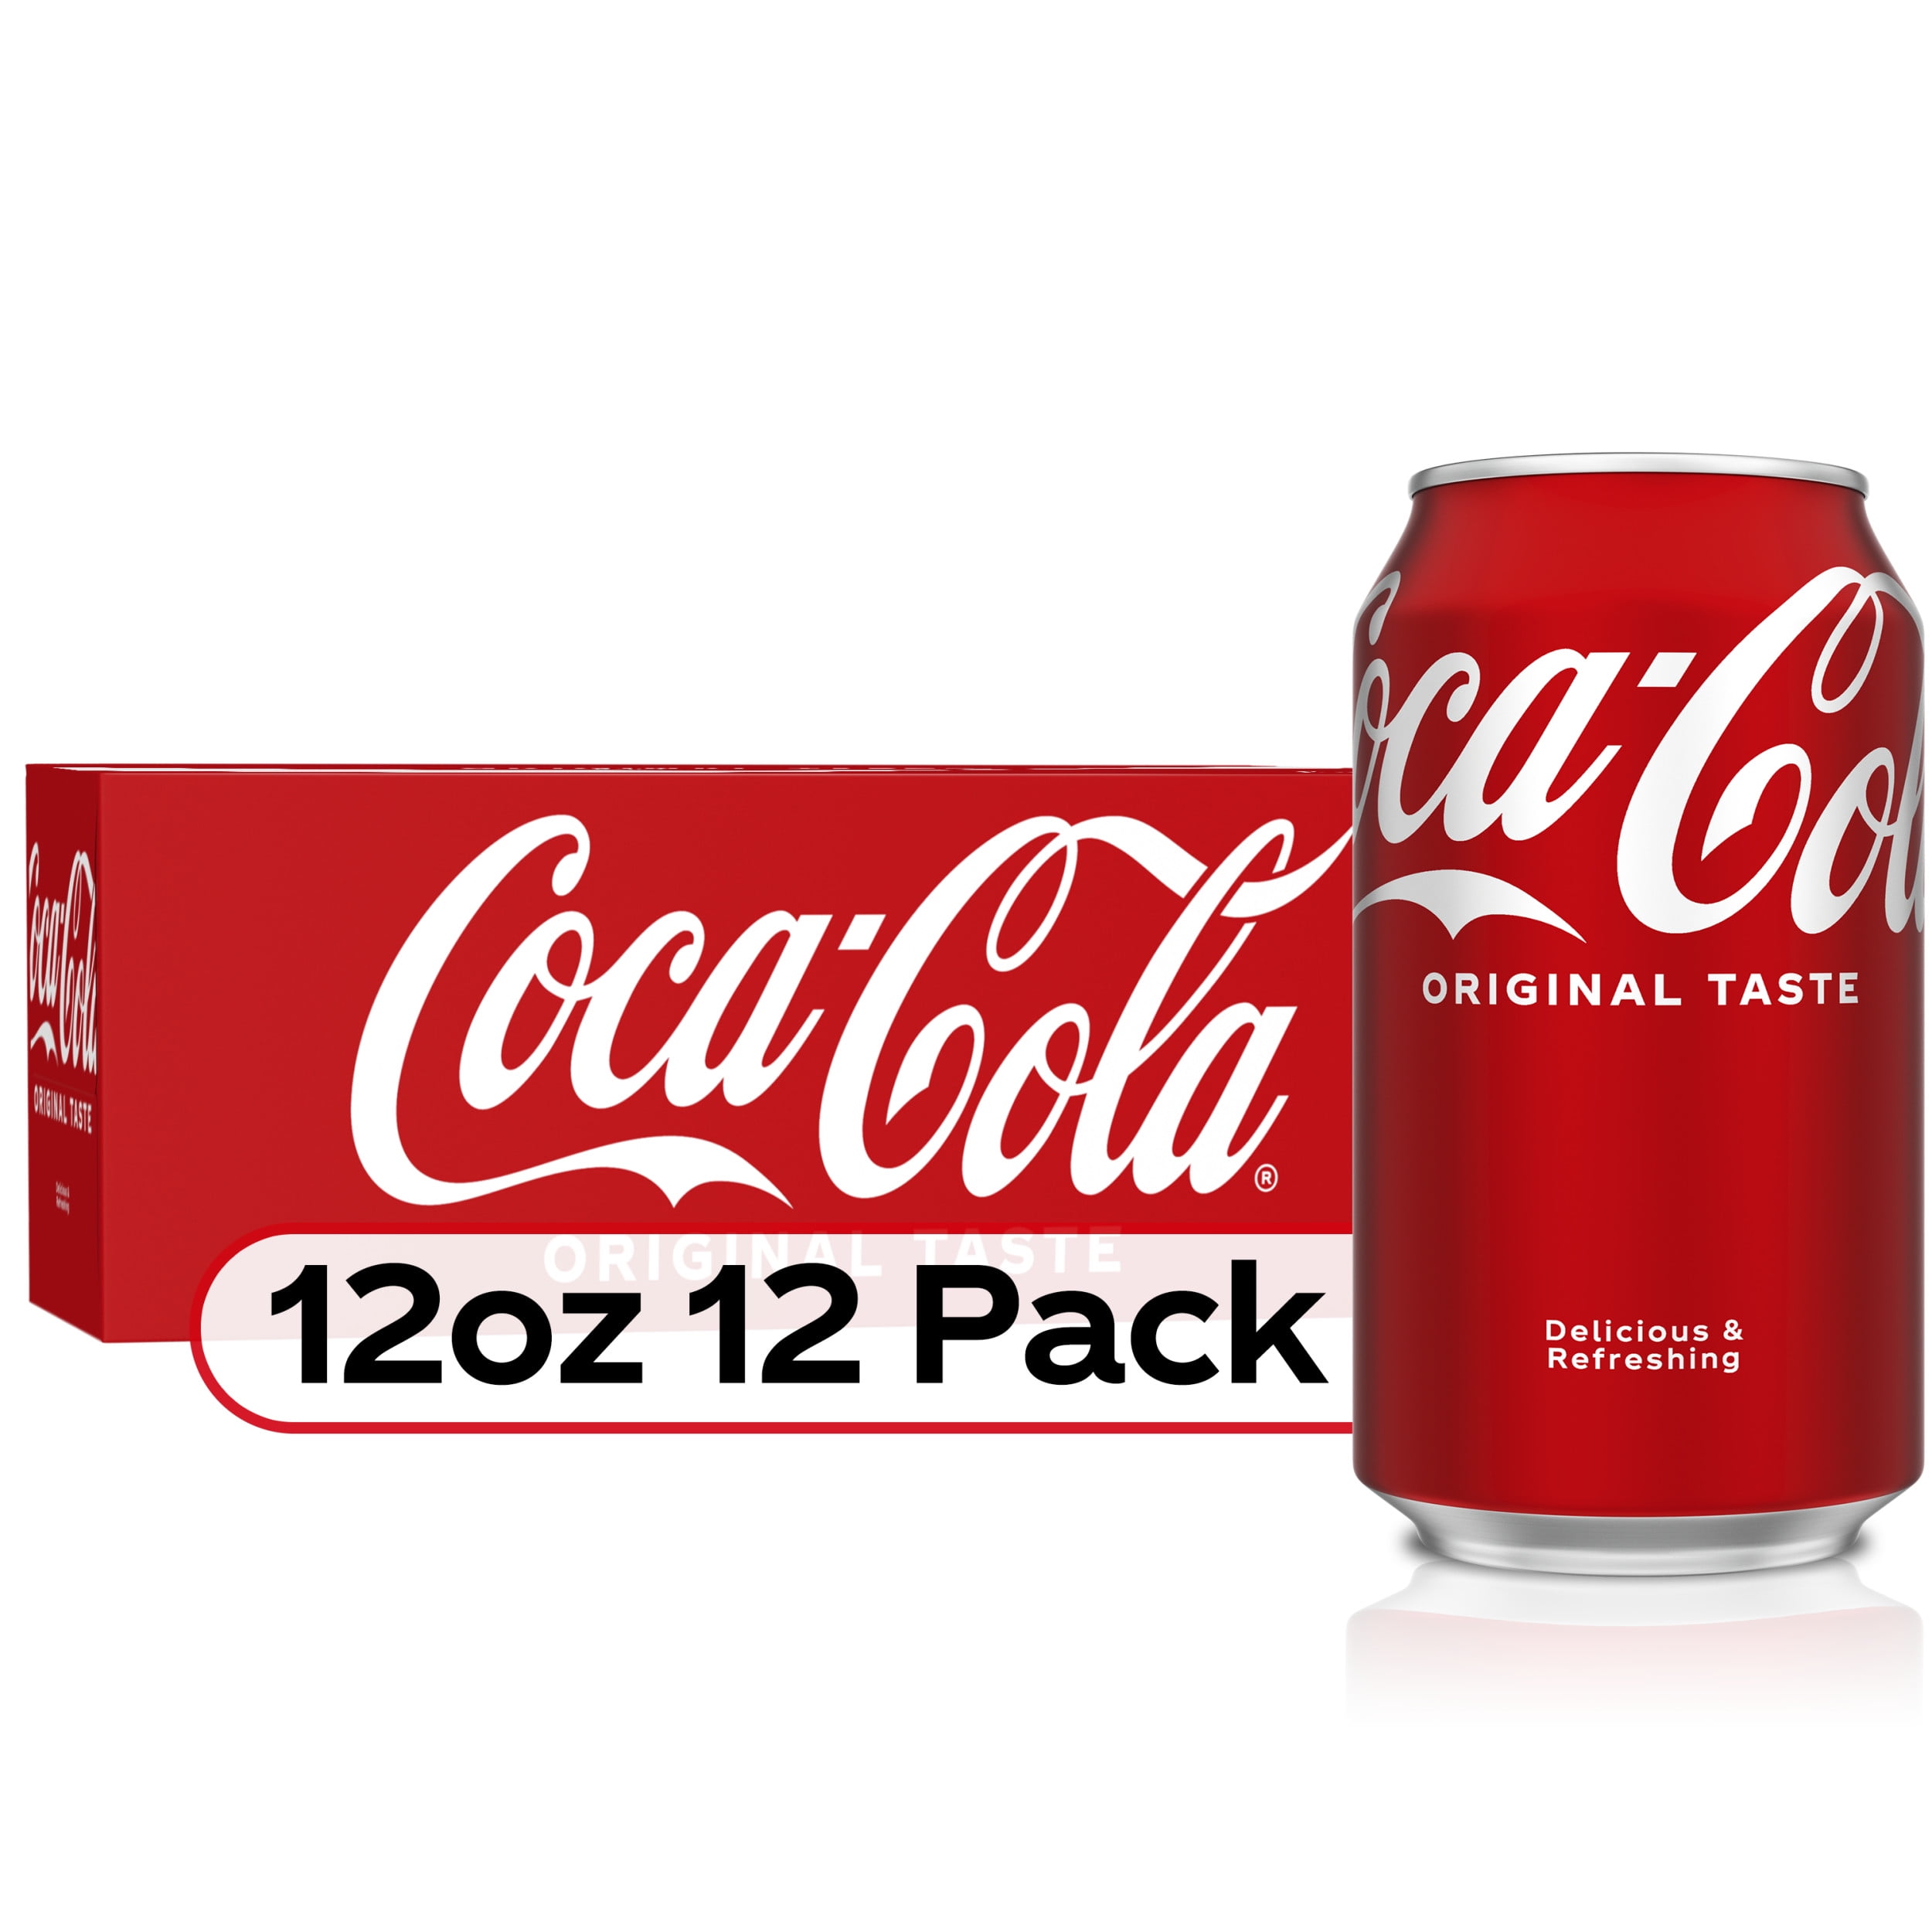 FREE SHIPPING Coca-Cola Super Premium Collection Cards 3 Pack 